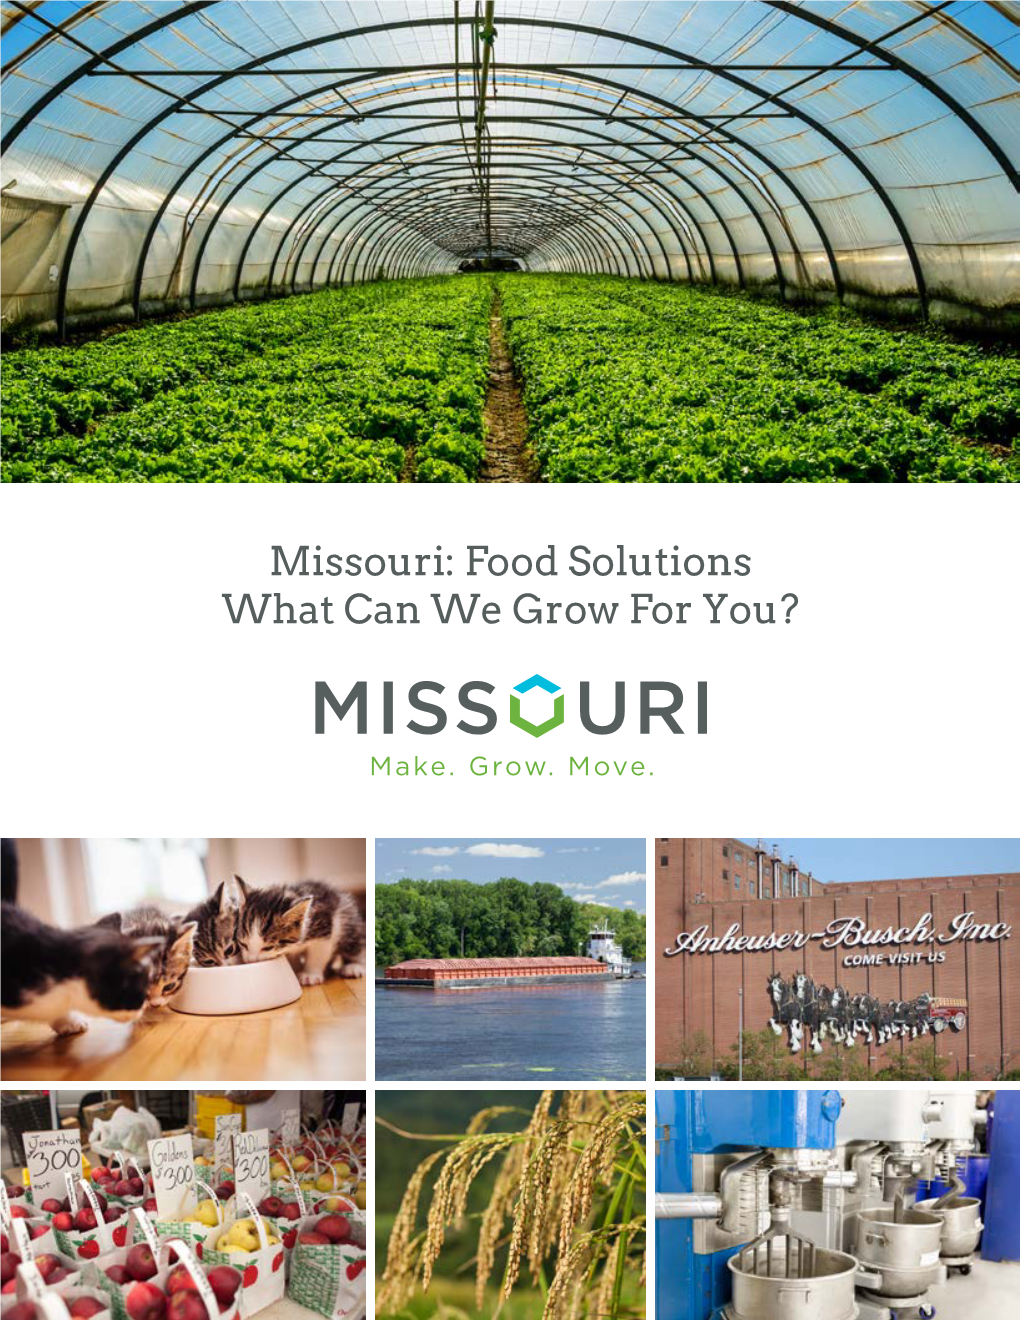 Missouri: Food Solutions What Can We Grow for You? Food Solutions in Missouri